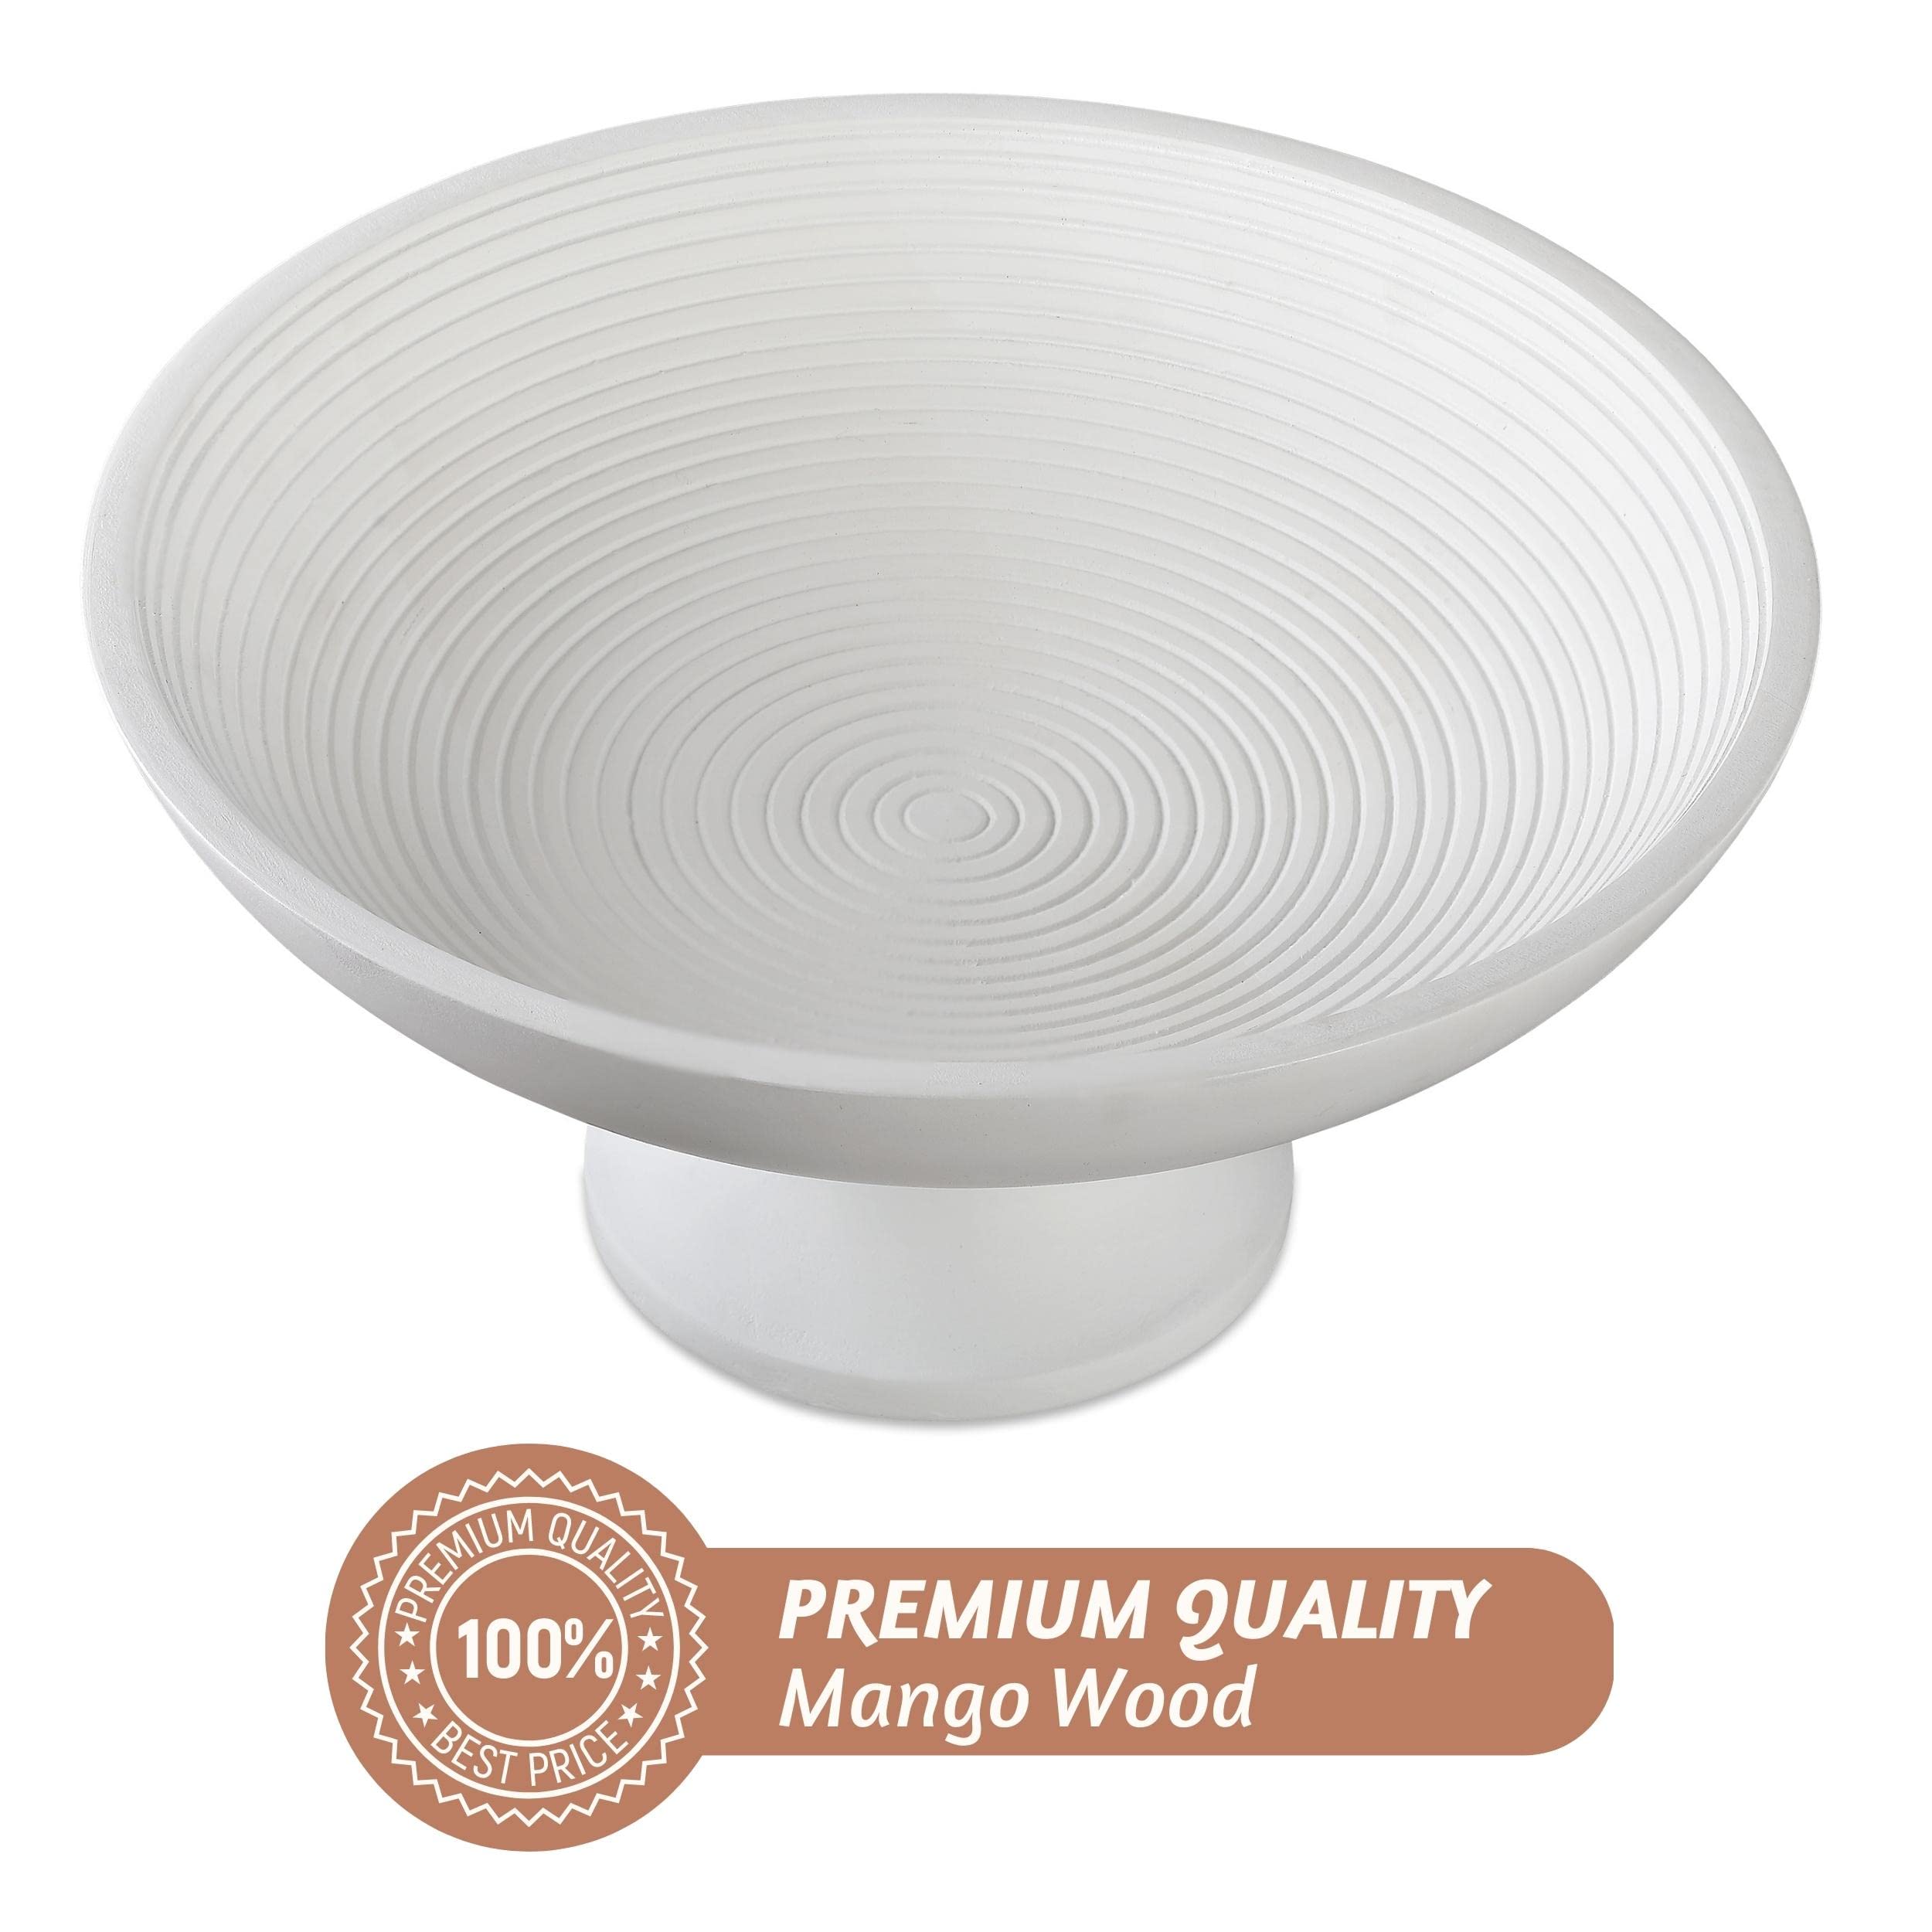 Folkulture Wood Fruit Bowl or Decorative Pedestal Bowl for Table Décor, Wooden Fruit Bowl for Kitchen Counter or Farmhouse Table Centerpiece, 12-inch Large Bowls for Breads, Mango Wood (White Rib)